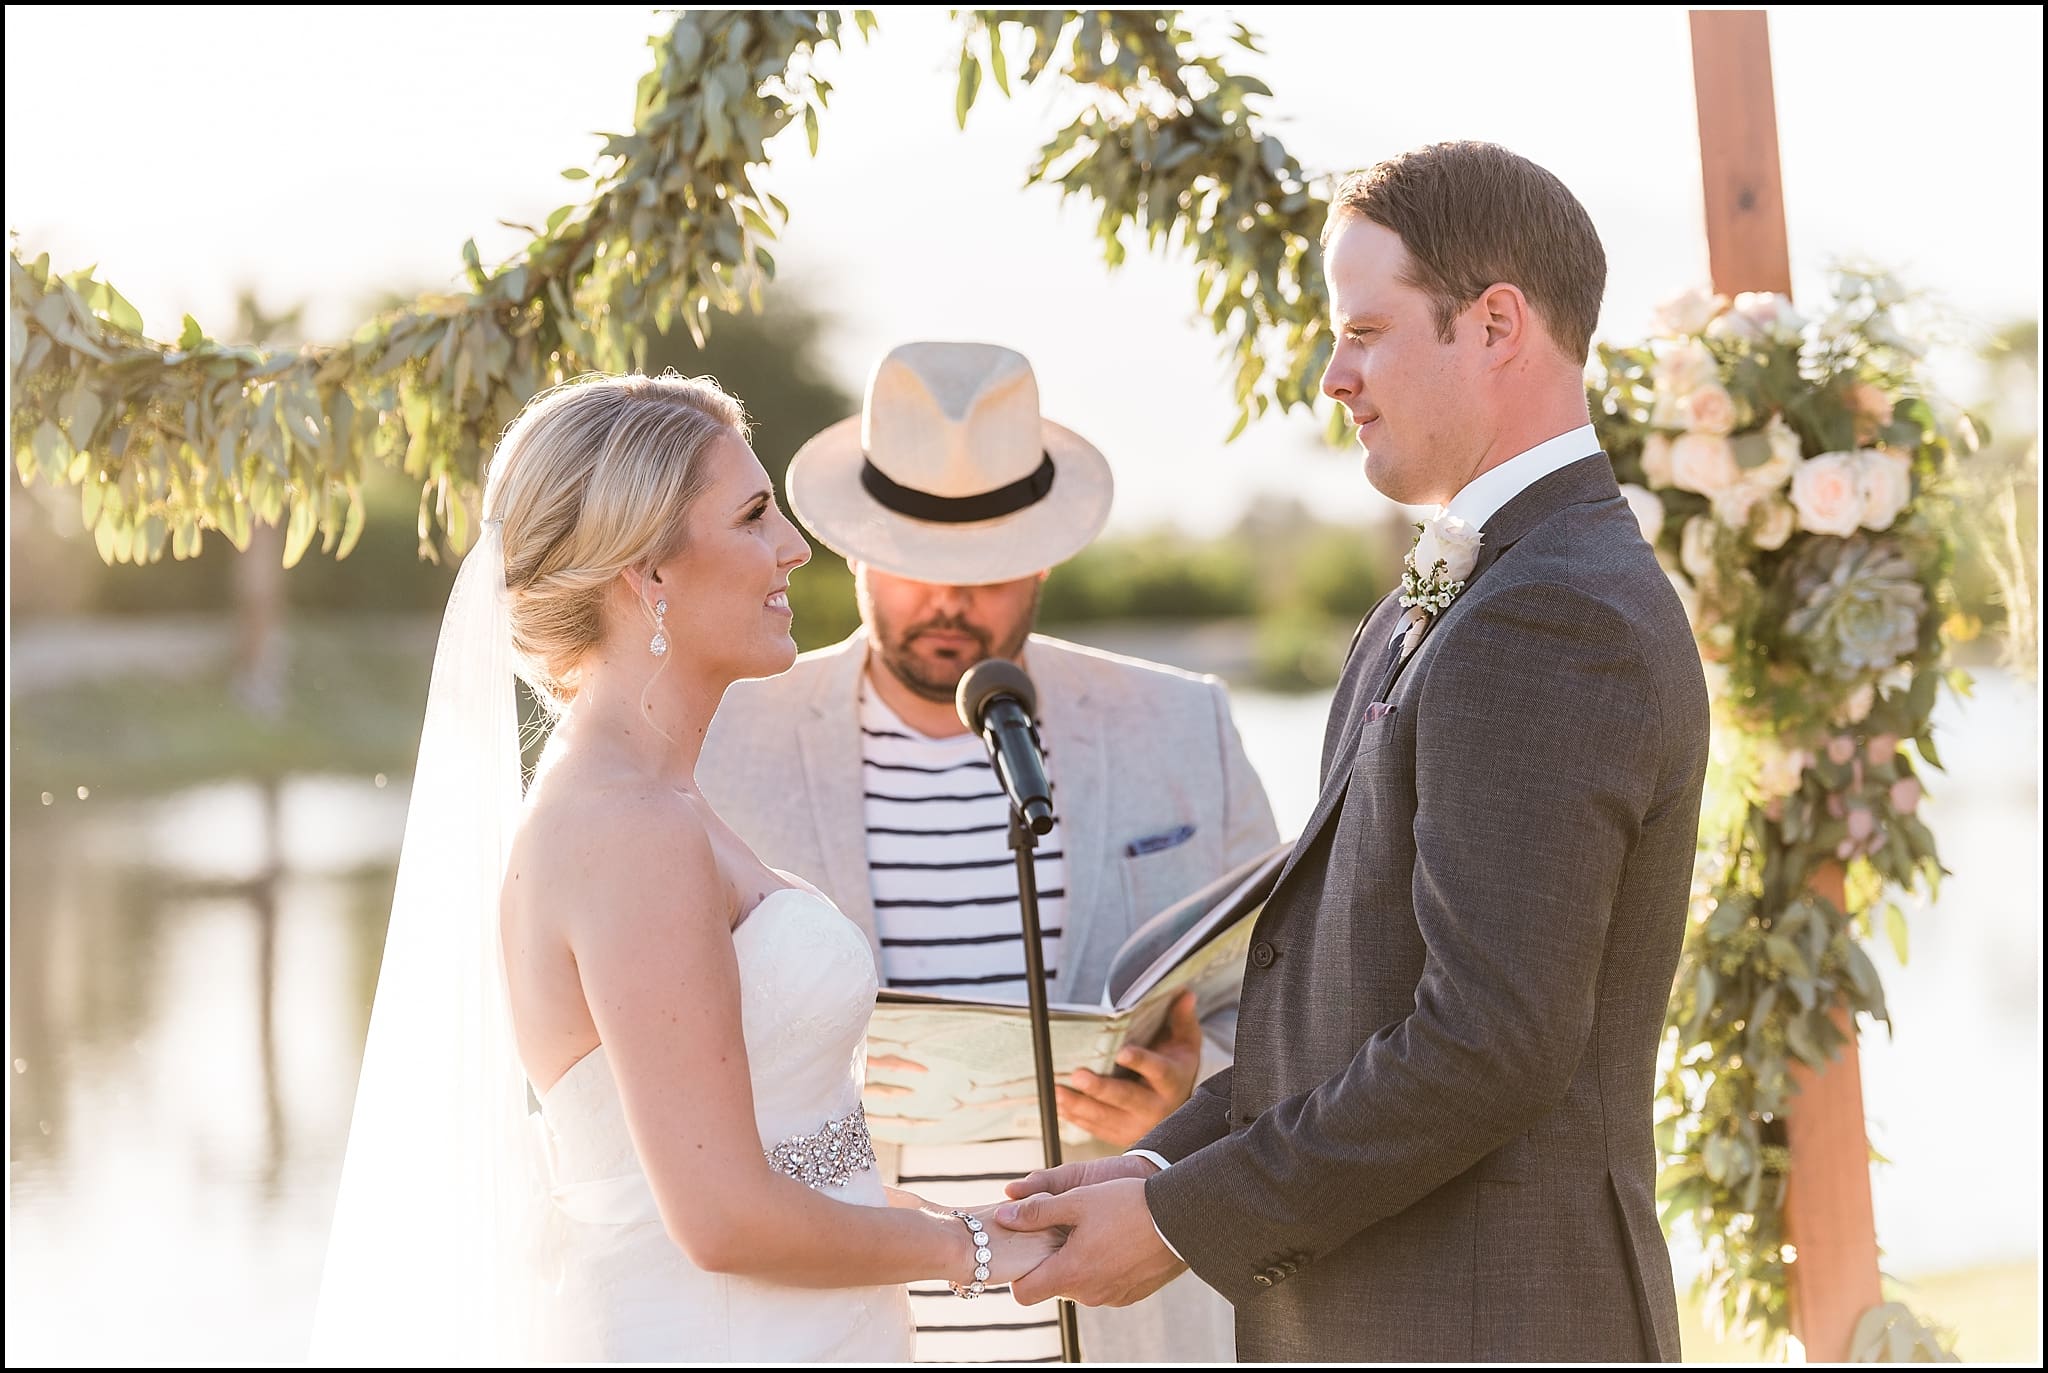  favorite wedding images 2016, wedding photos from 2016, our favorite wedding photos, indio wedding, 